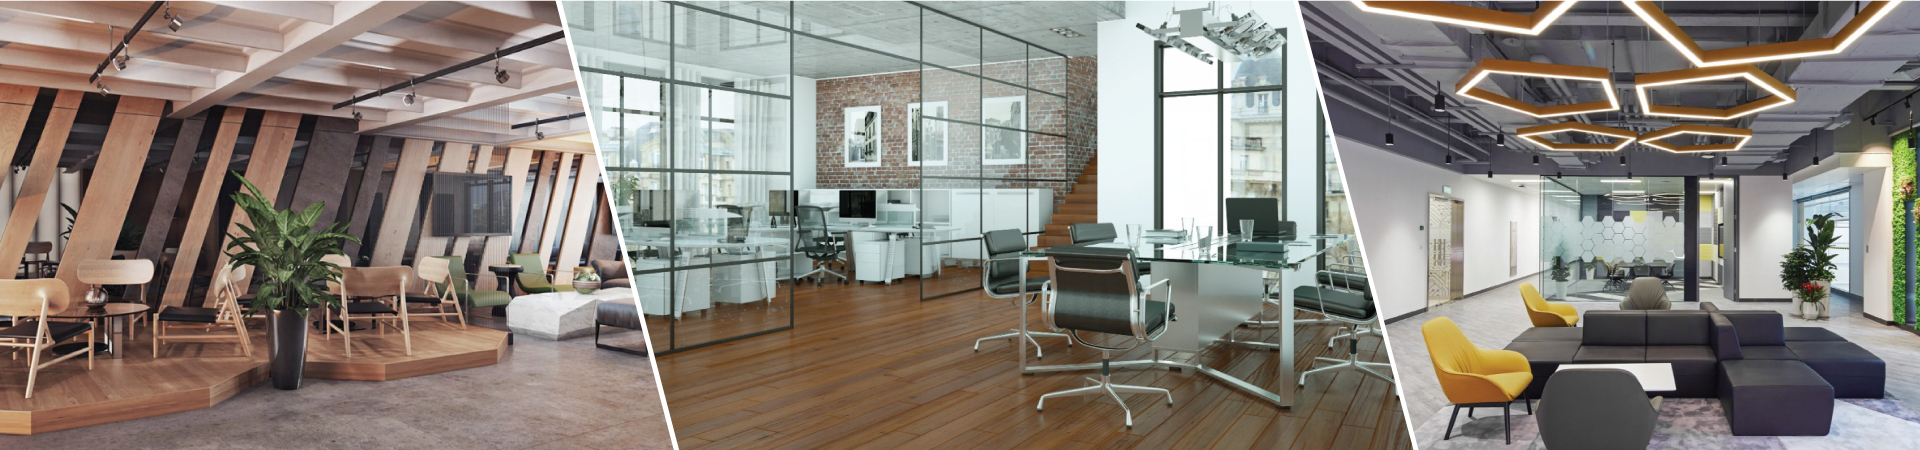 MNC Office Design Company in India